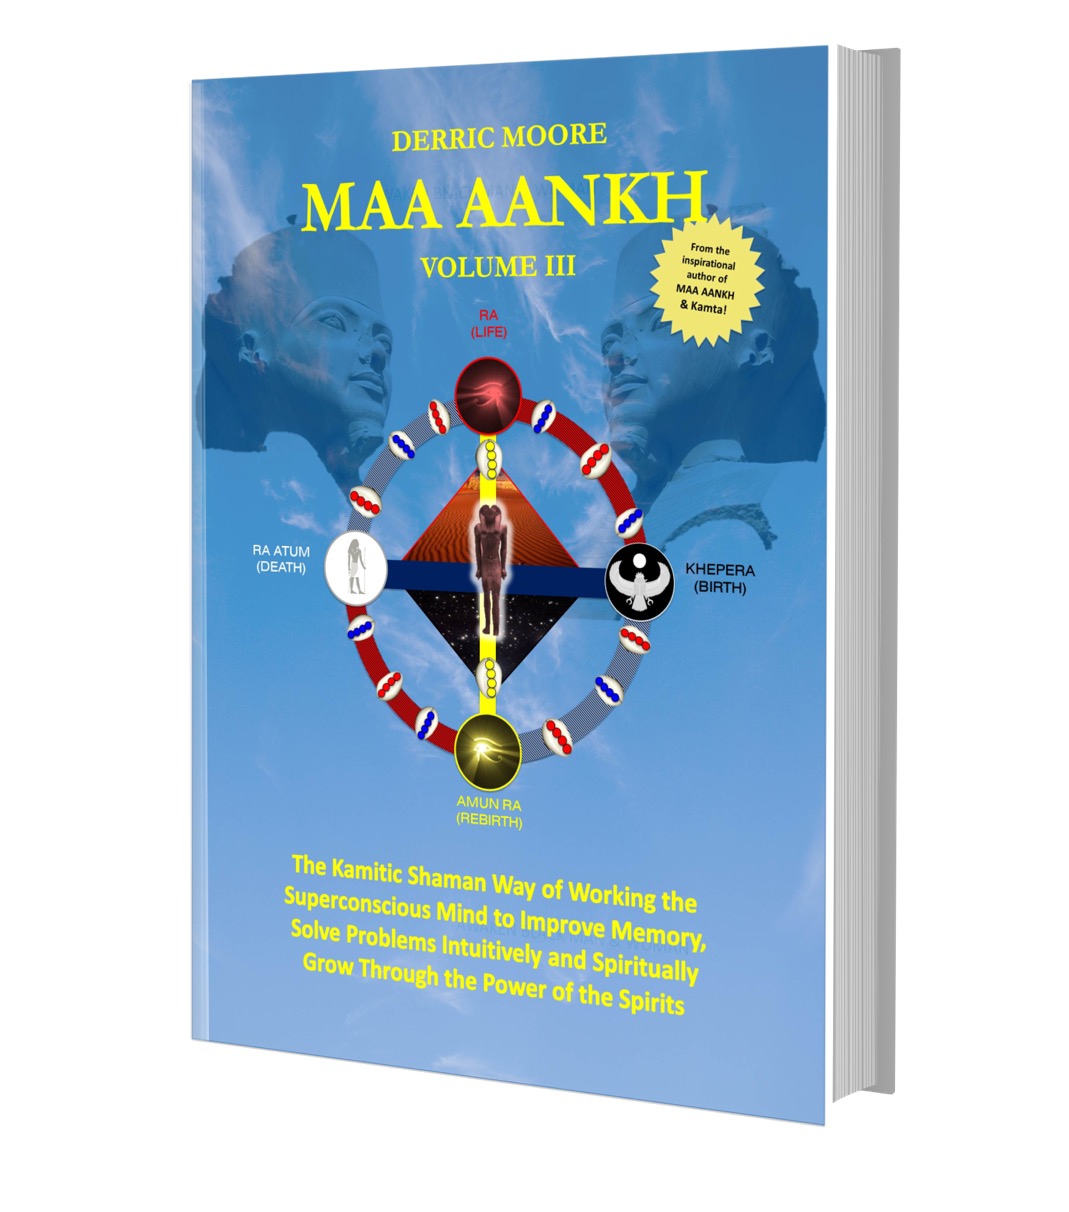 MAA AANKH Volume III: The Kamitic Shaman Way of Working the Superconscious Mind to Improve Memory, Solve Problems Intuitively - Click Image to Close